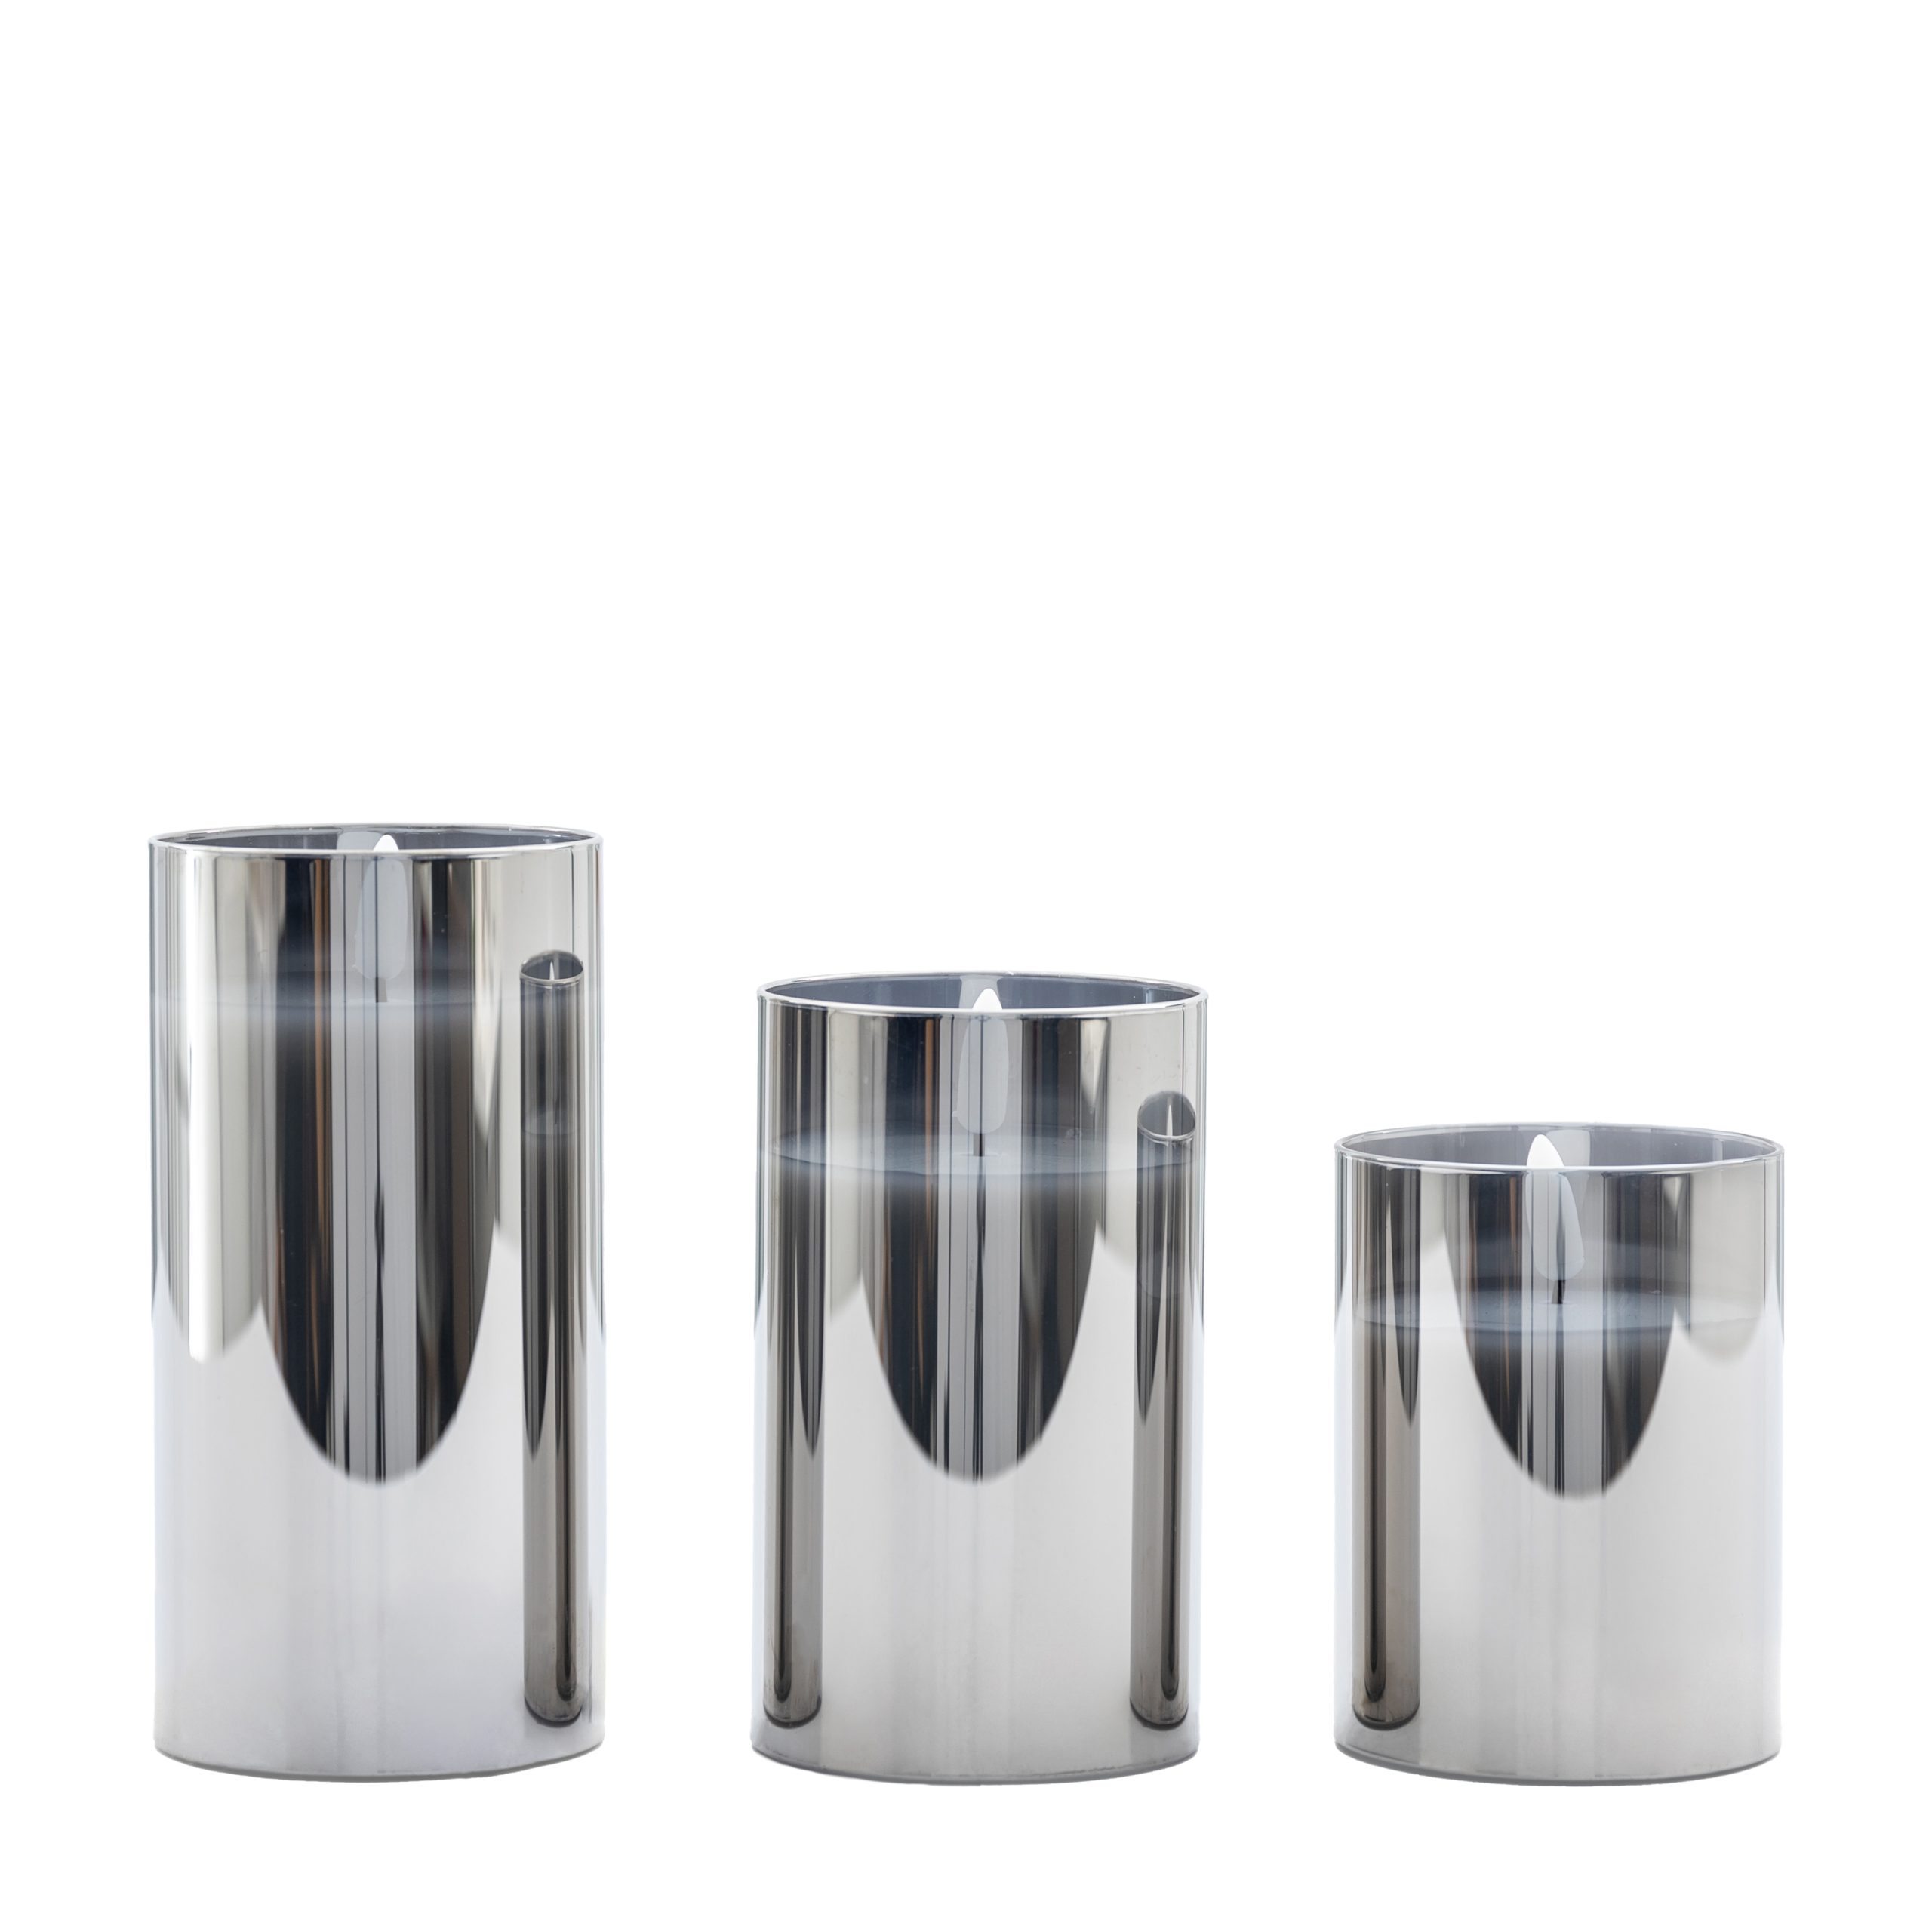 Gallery Direct LED Candle Grey Votive (Set of 3)